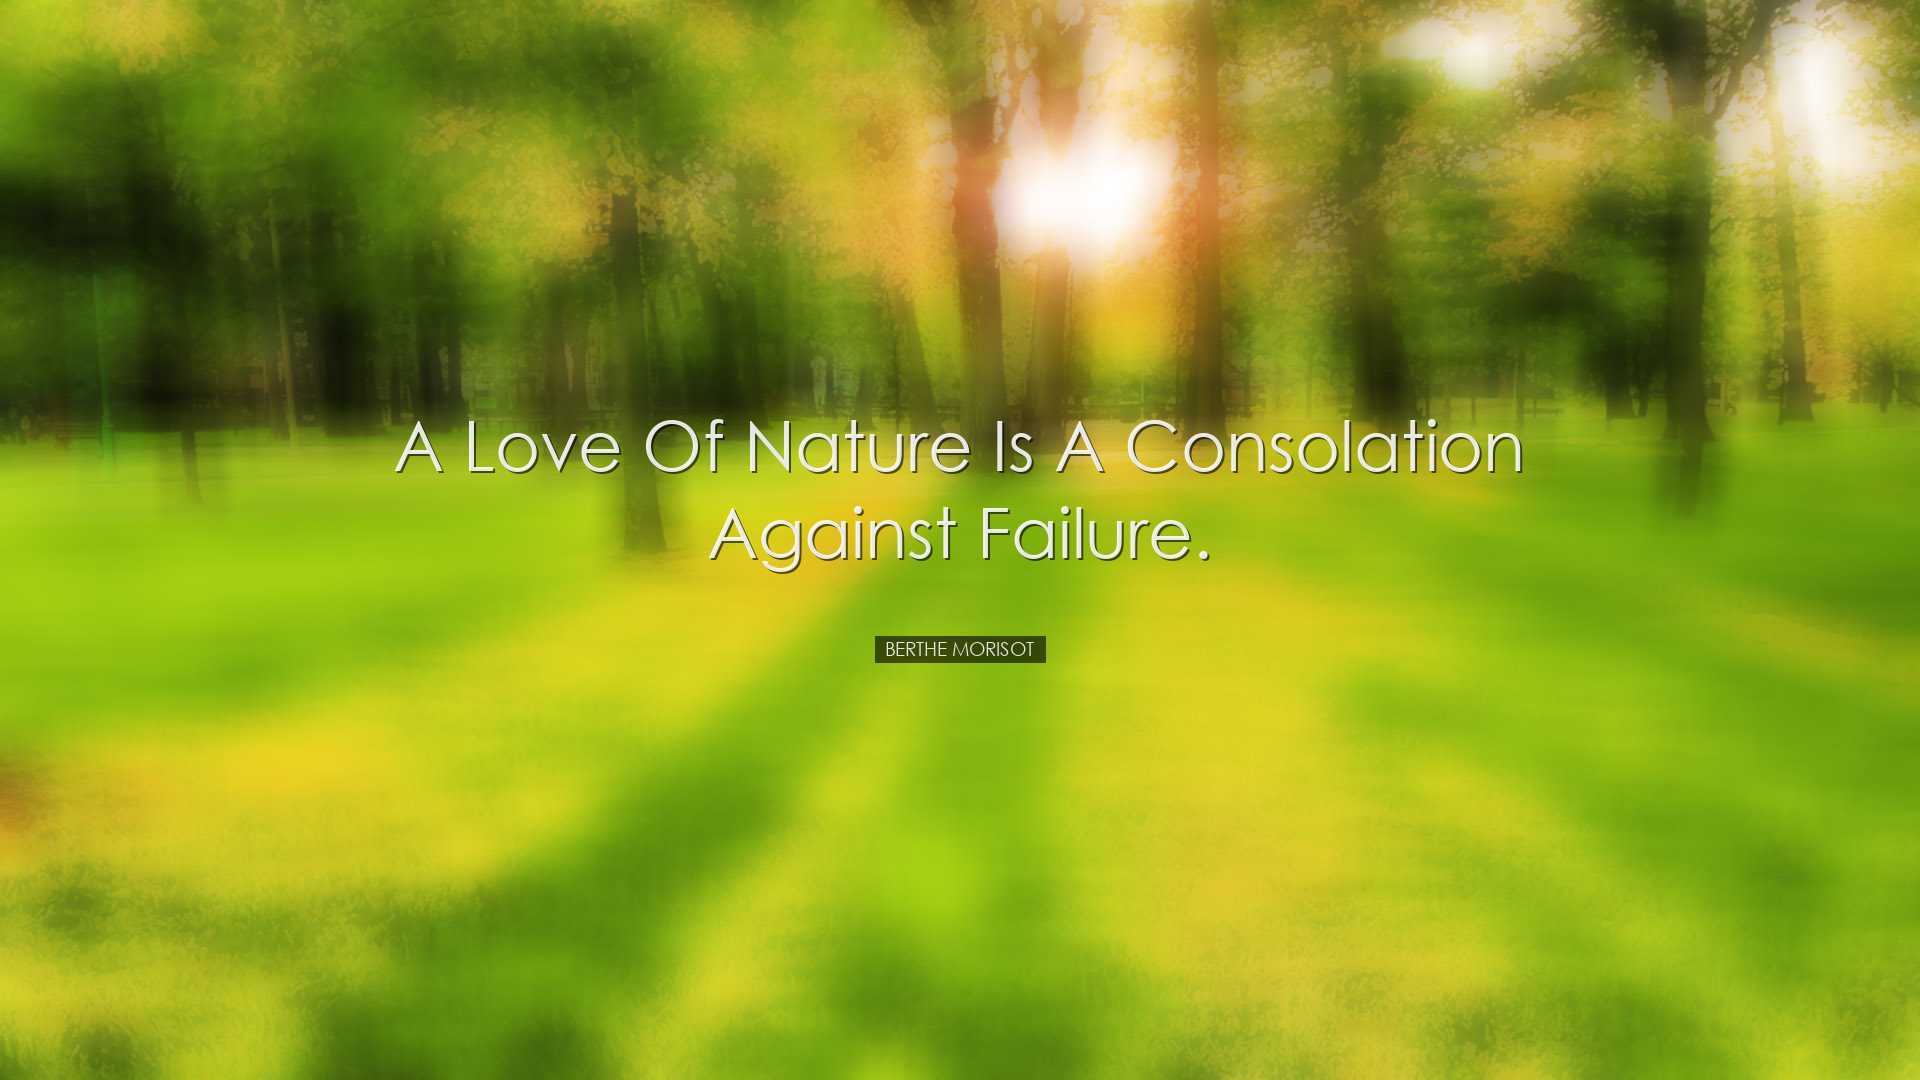 A love of nature is a consolation against failure. - Berthe Moriso